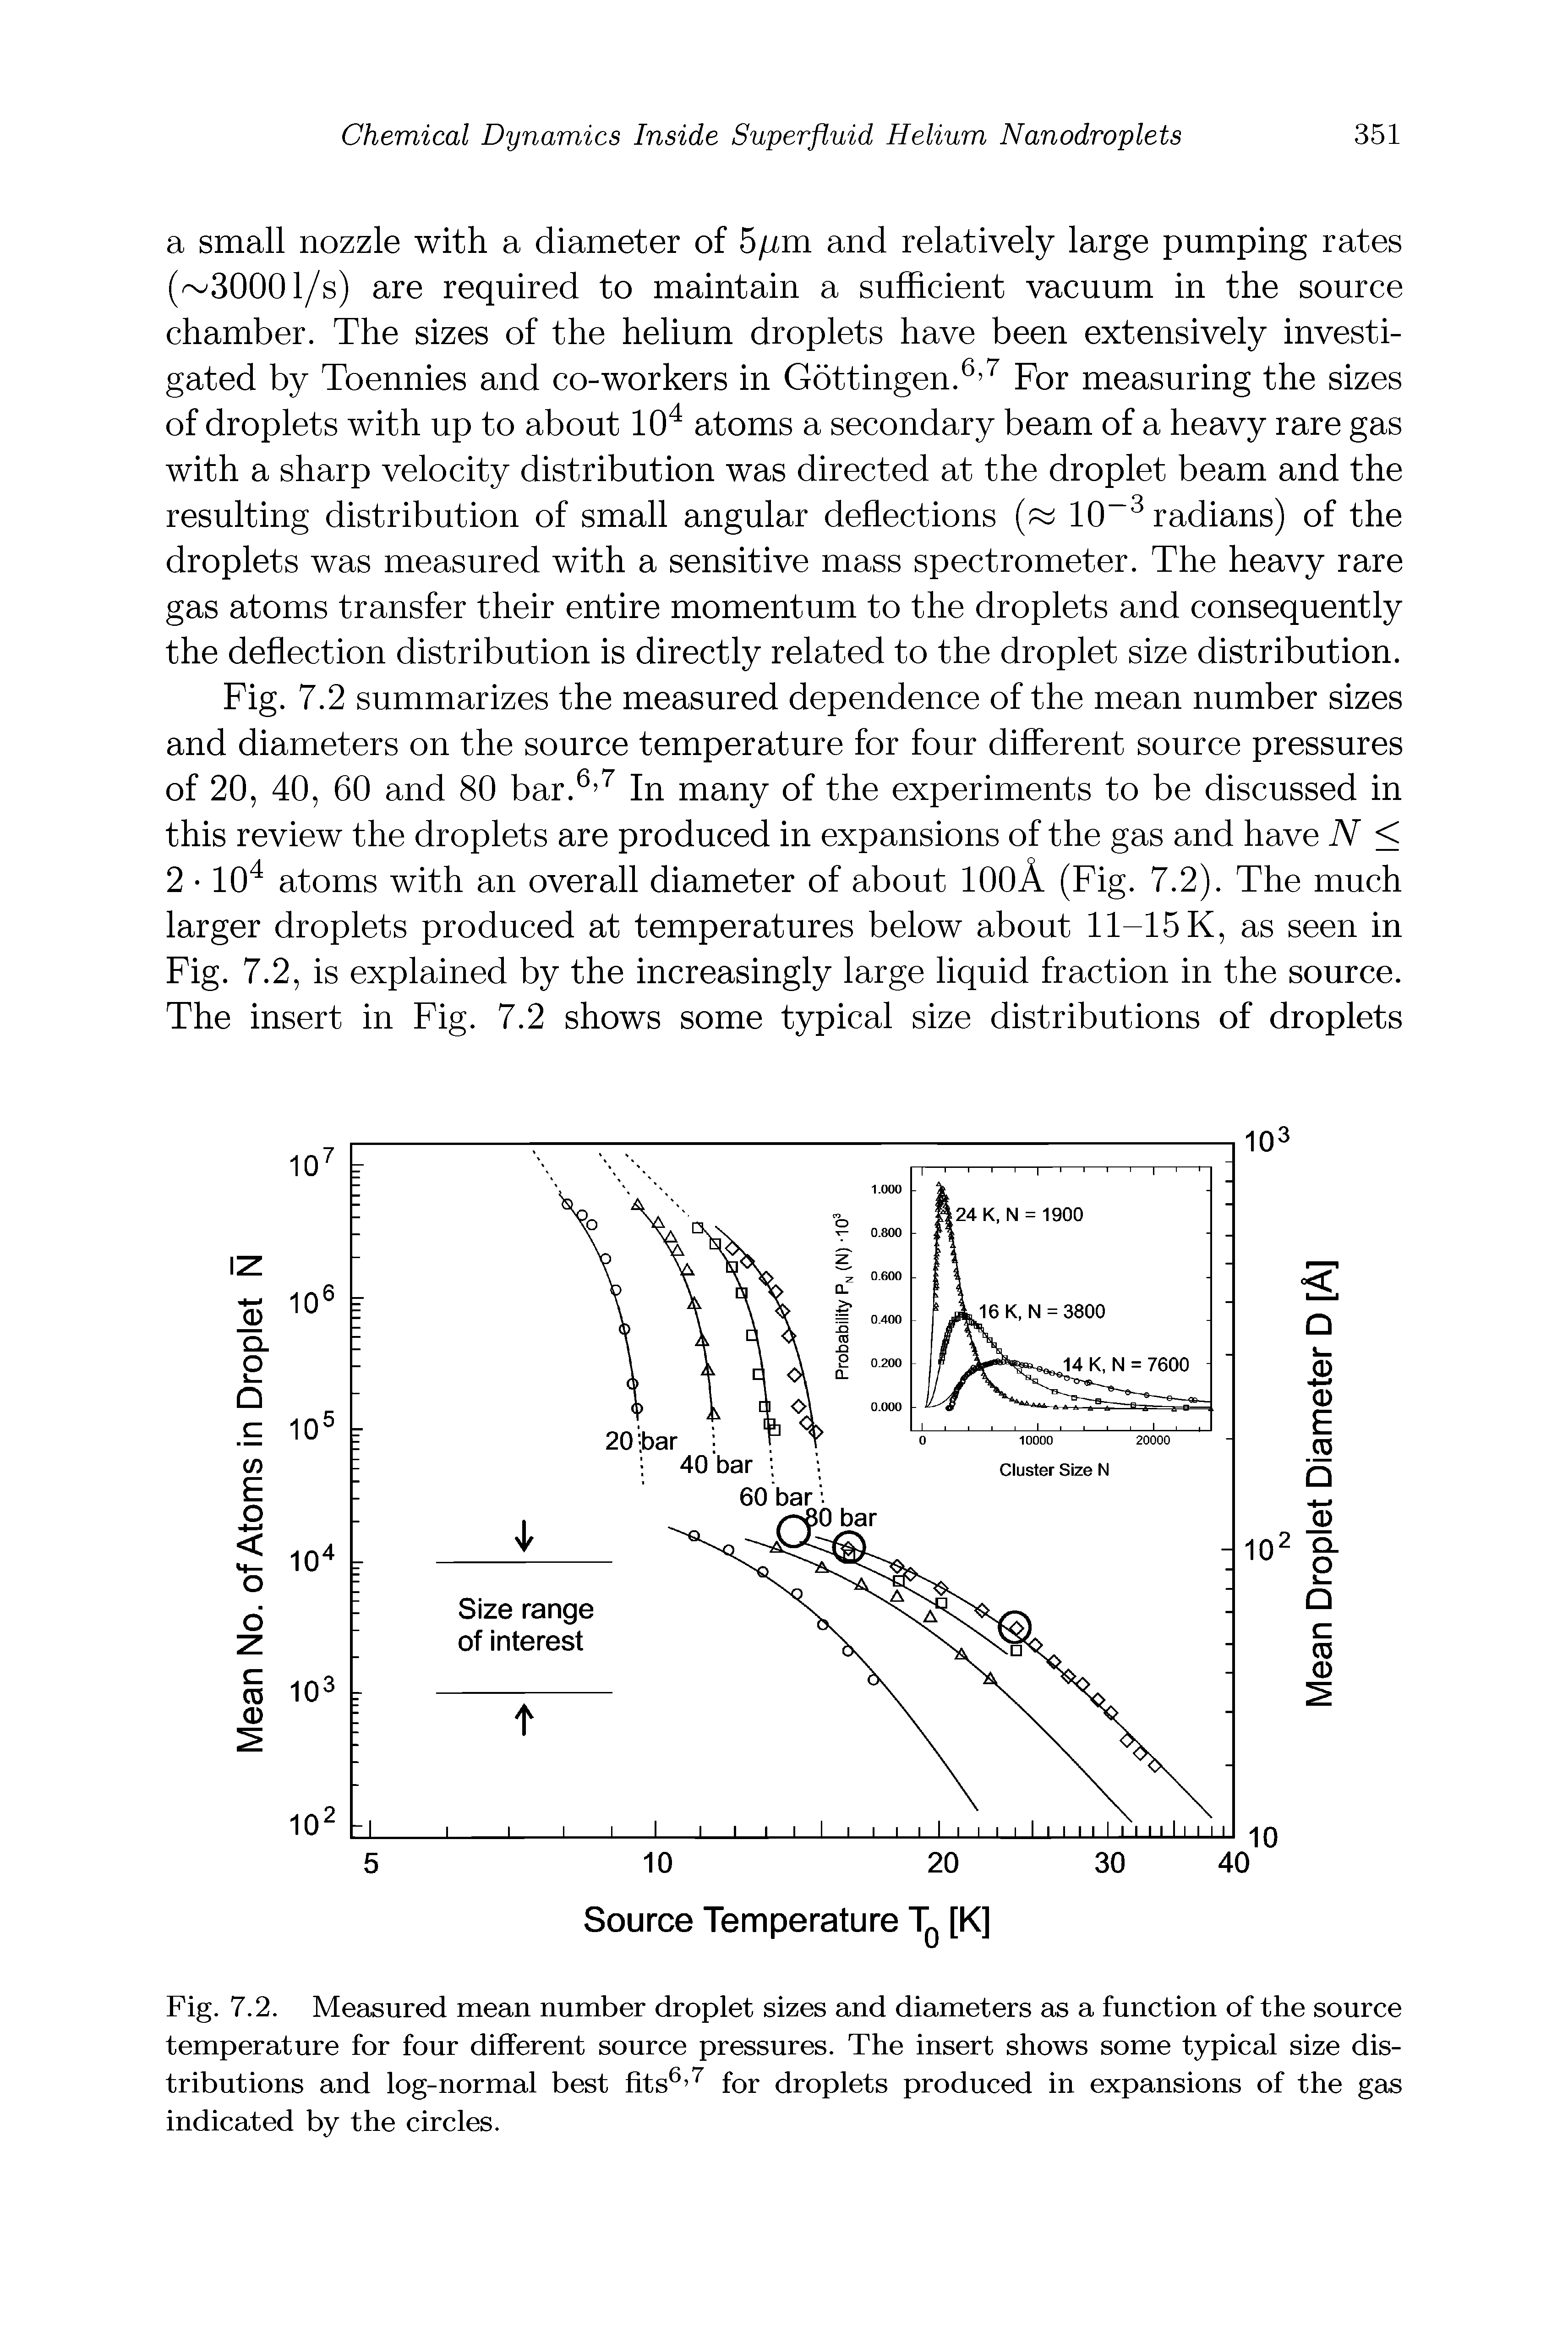 Fig. 7.2 summarizes the measured dependence of the mean number sizes and diameters on the source temperature for four different source pressures of 20, 40, 60 and 80 bar. In many of the experiments to be discussed in this review the droplets are produced in expansions of the gas and have N < 2 10 atoms with an overall diameter of about lOOA (Fig. 7.2). The much larger droplets produced at temperatures below about 11-15 K, as seen in Fig. 7.2, is explained by the increasingly large liquid fraction in the source. The insert in Fig. 7.2 shows some typical size distributions of droplets...